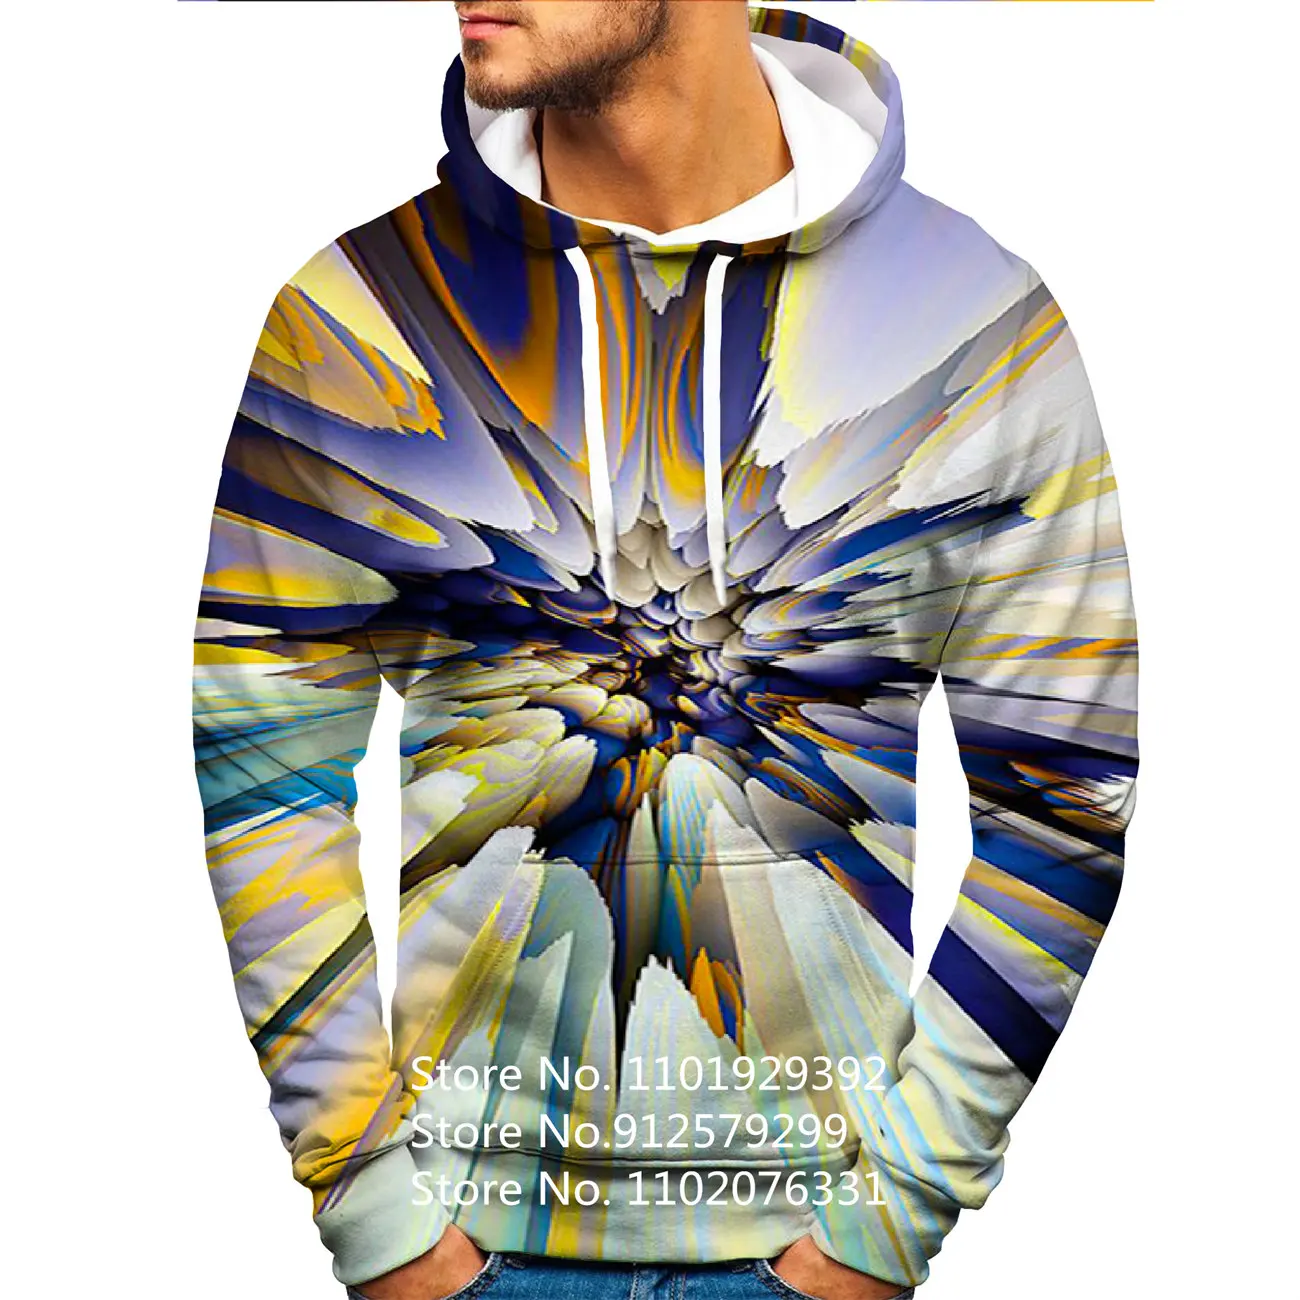 New Fashion Abstract Pattern Hoodie 3D Stone Grain Printed Mens Sweatshirt Unisex Pullover Spring Autumn Jacket